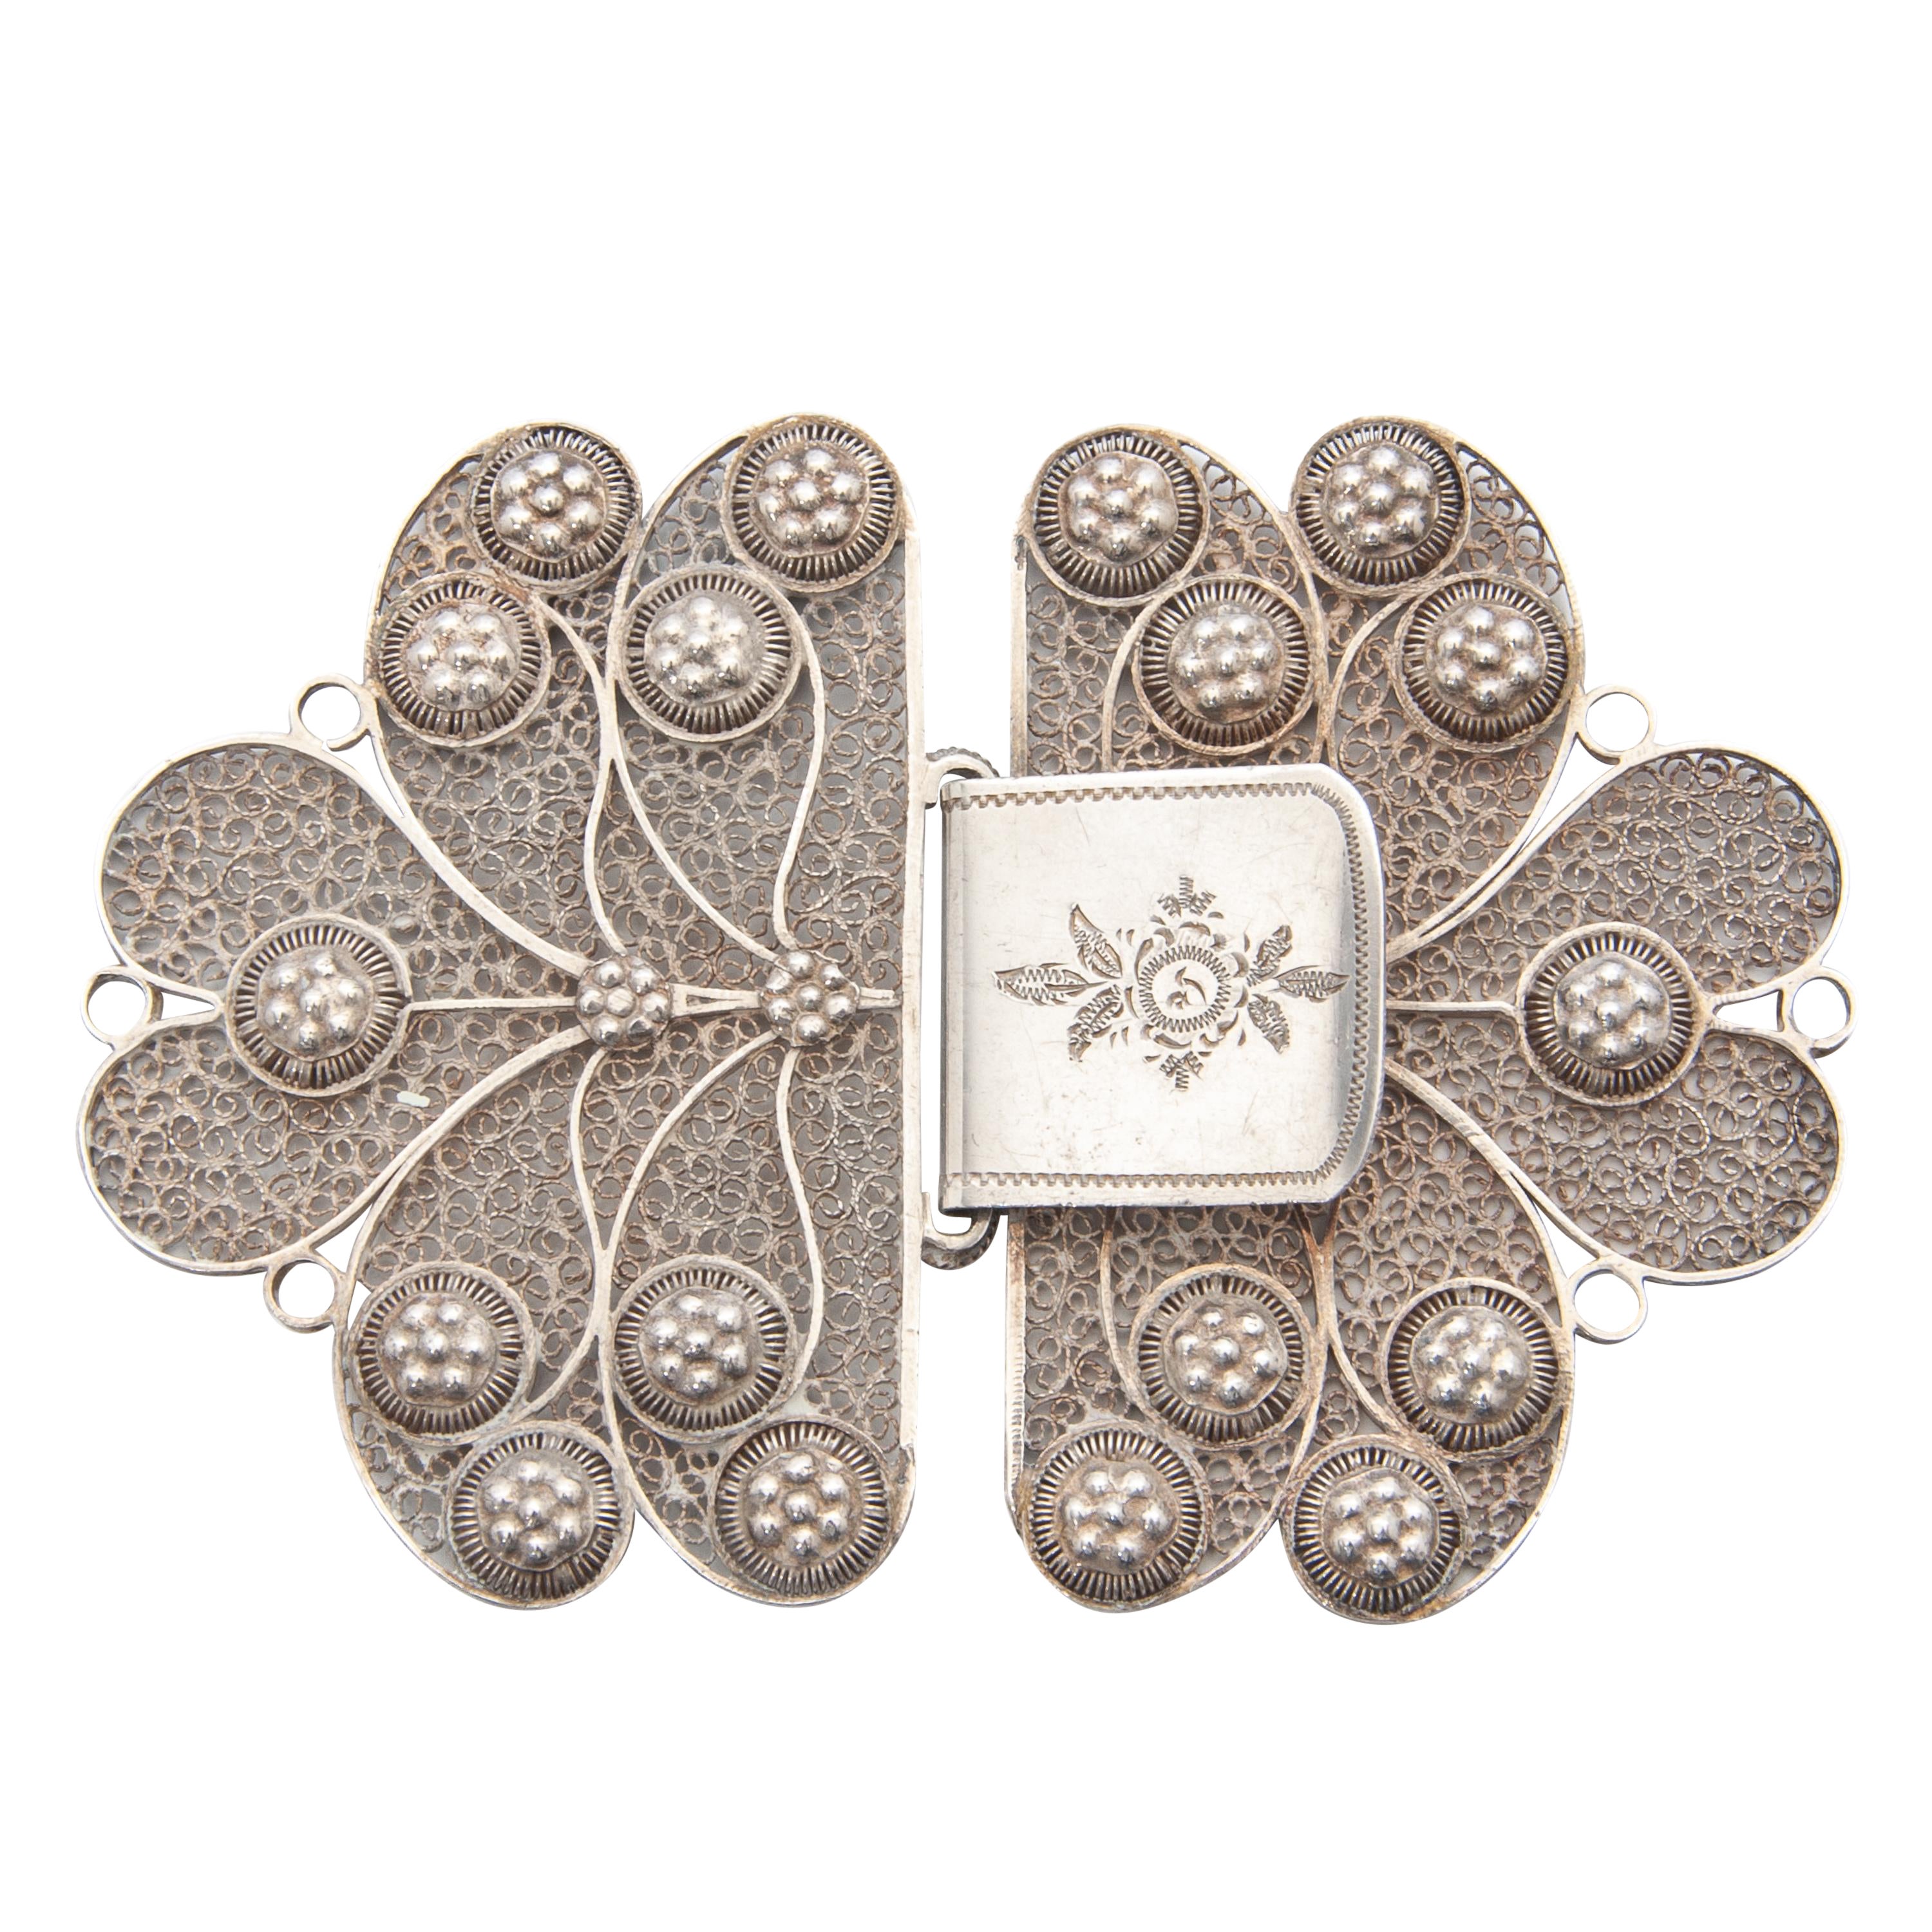 Antique Silver Filigree and Cannetille Foliage Belt Buckle For Sale